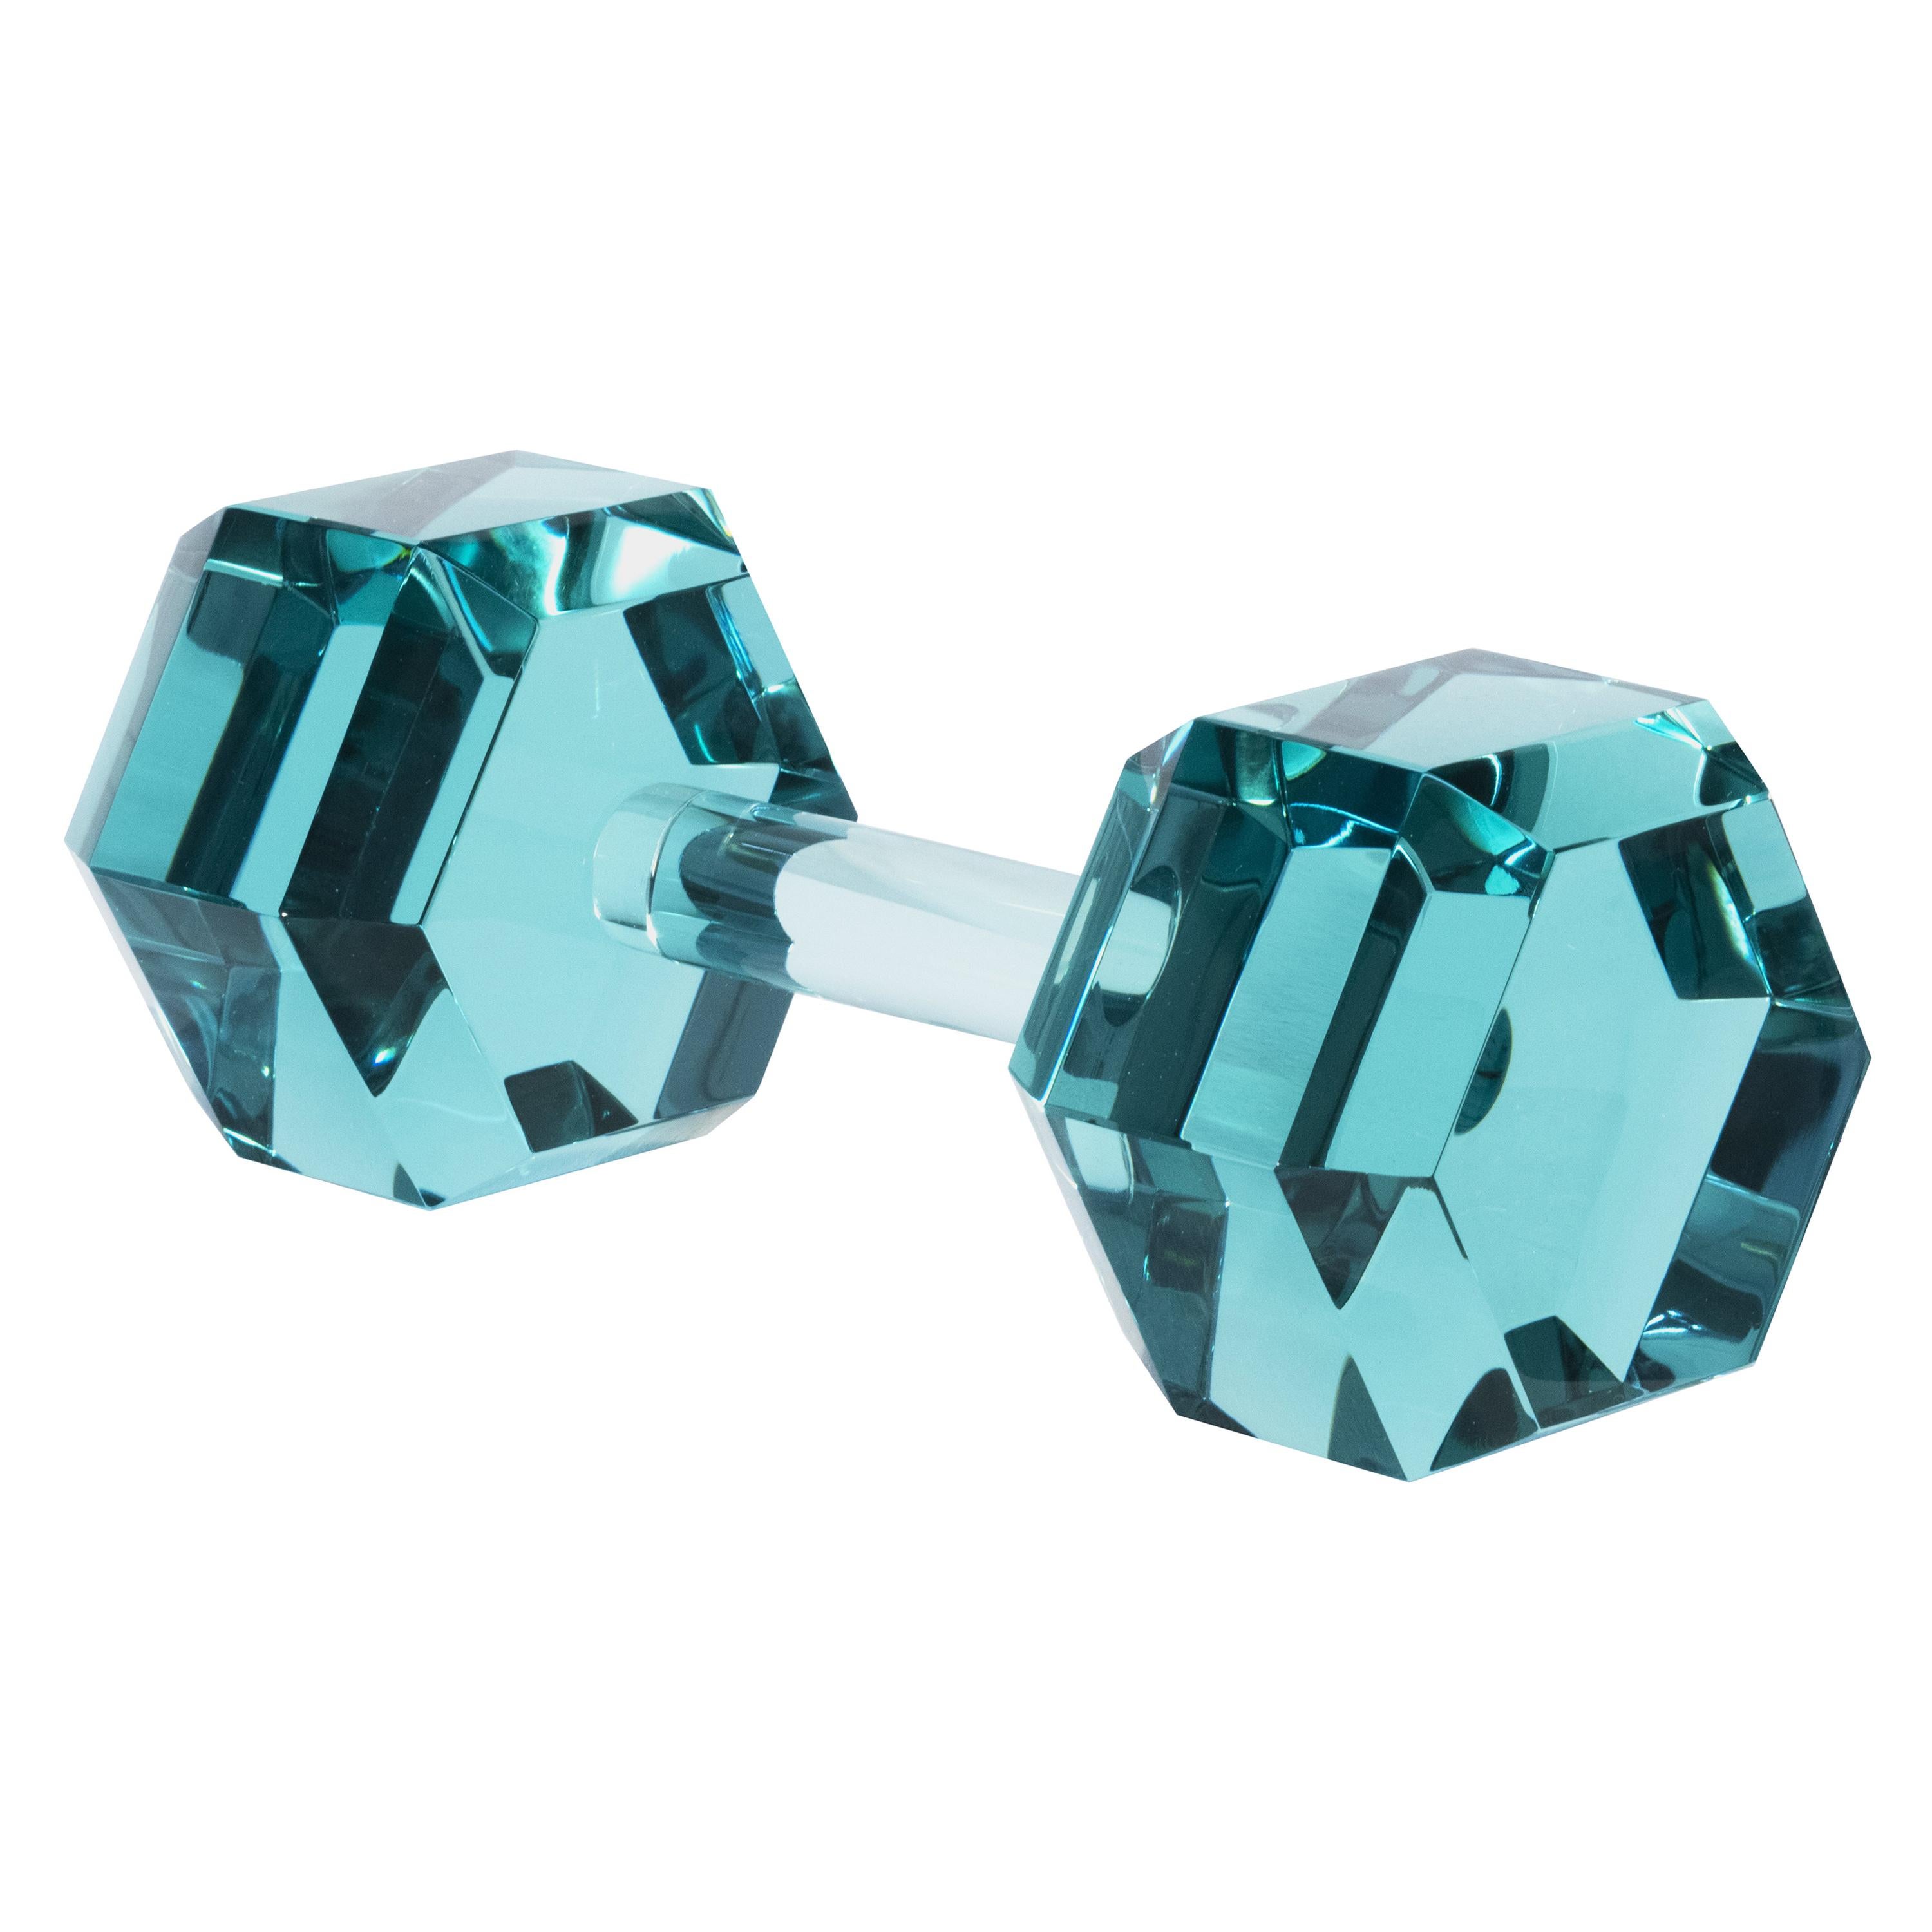 Contemporary 'Dumbbell' Aquamarine Crystal Handmade in Italy by Ghirò Studio